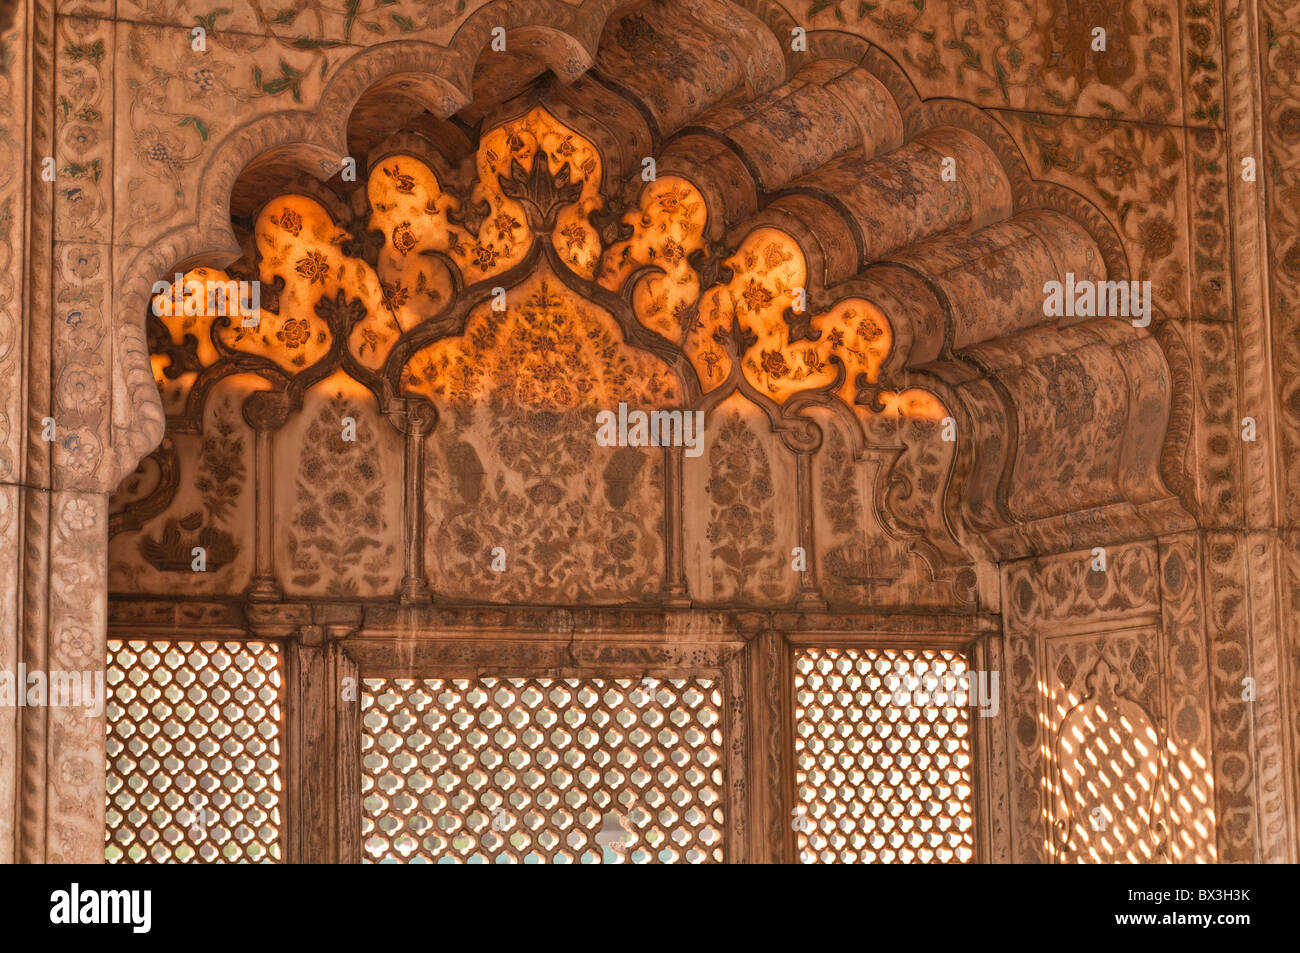 Interior decoration in marble, Red Fort, Delhi, India Stock Photo